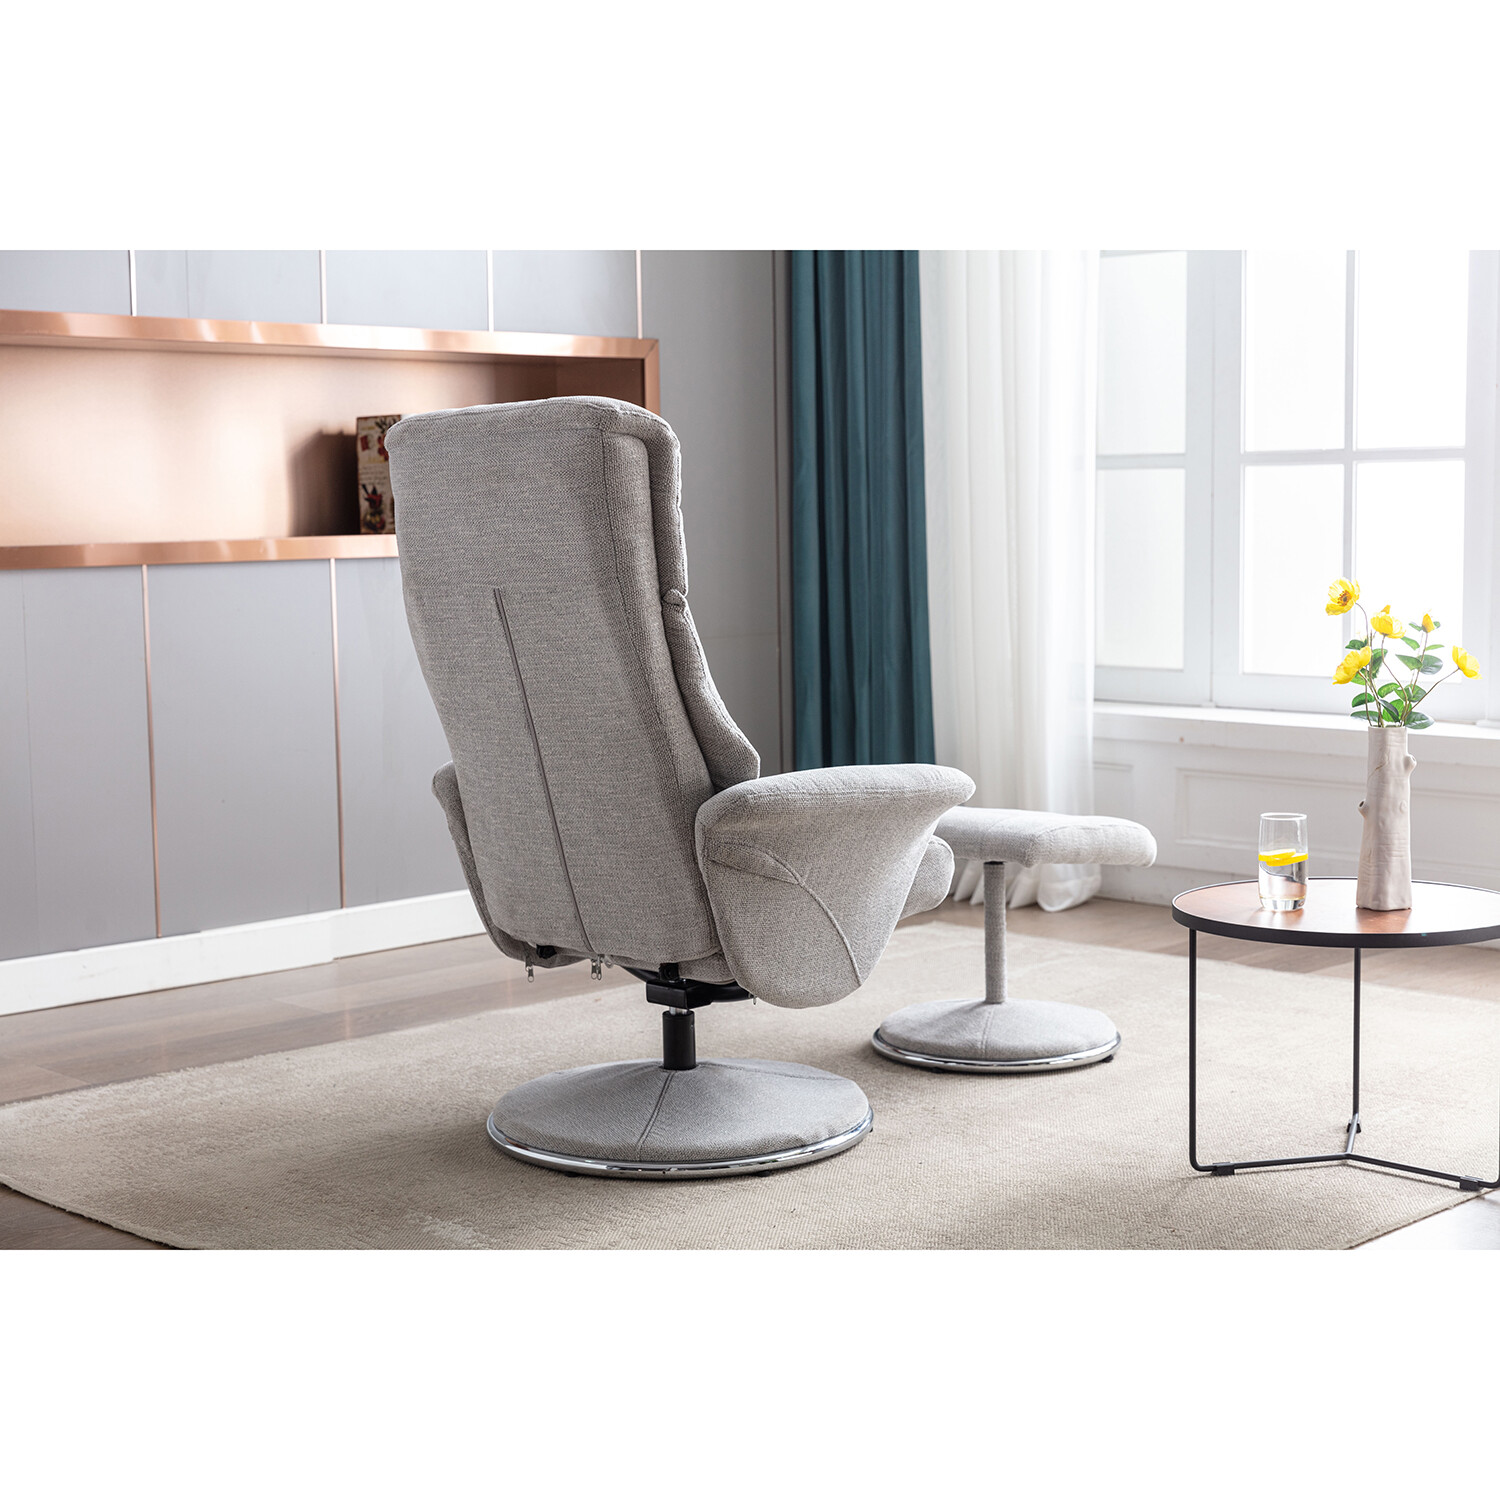 Madrid Grey Fabric Swivel TV Chair with Footrest Image 9